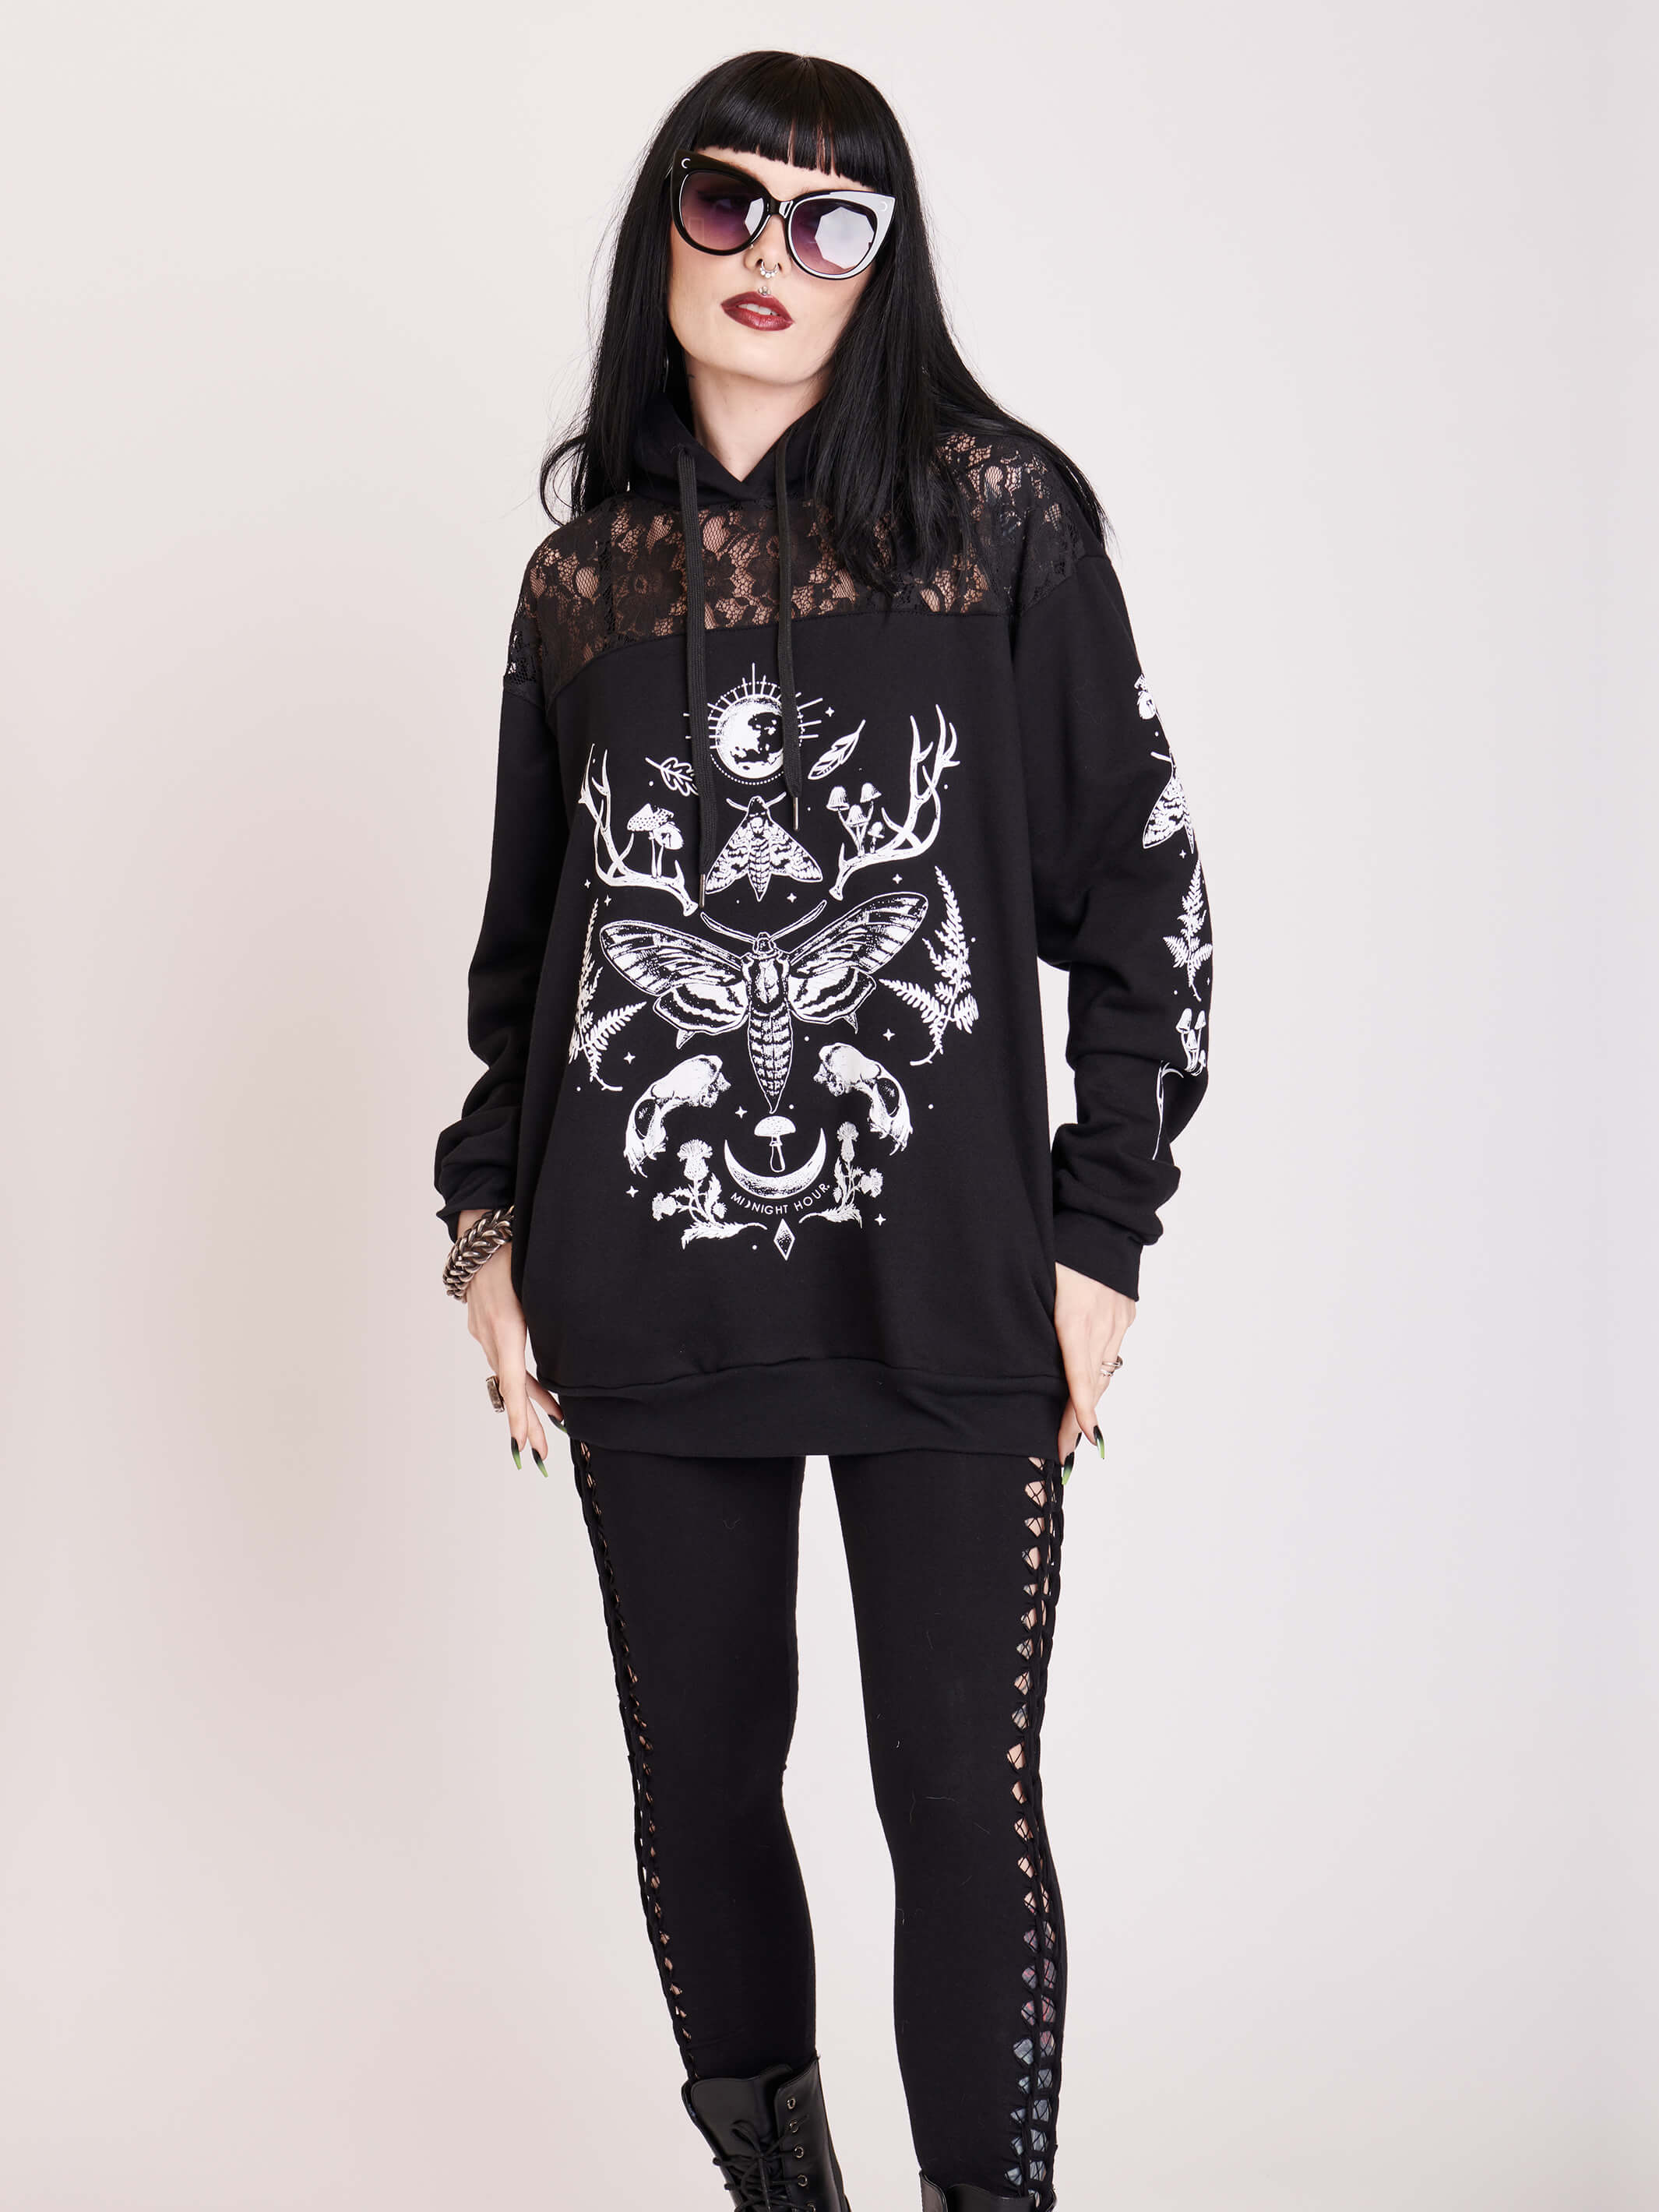 Forest witch graphic on lace yoke fleece unisex hoodie.